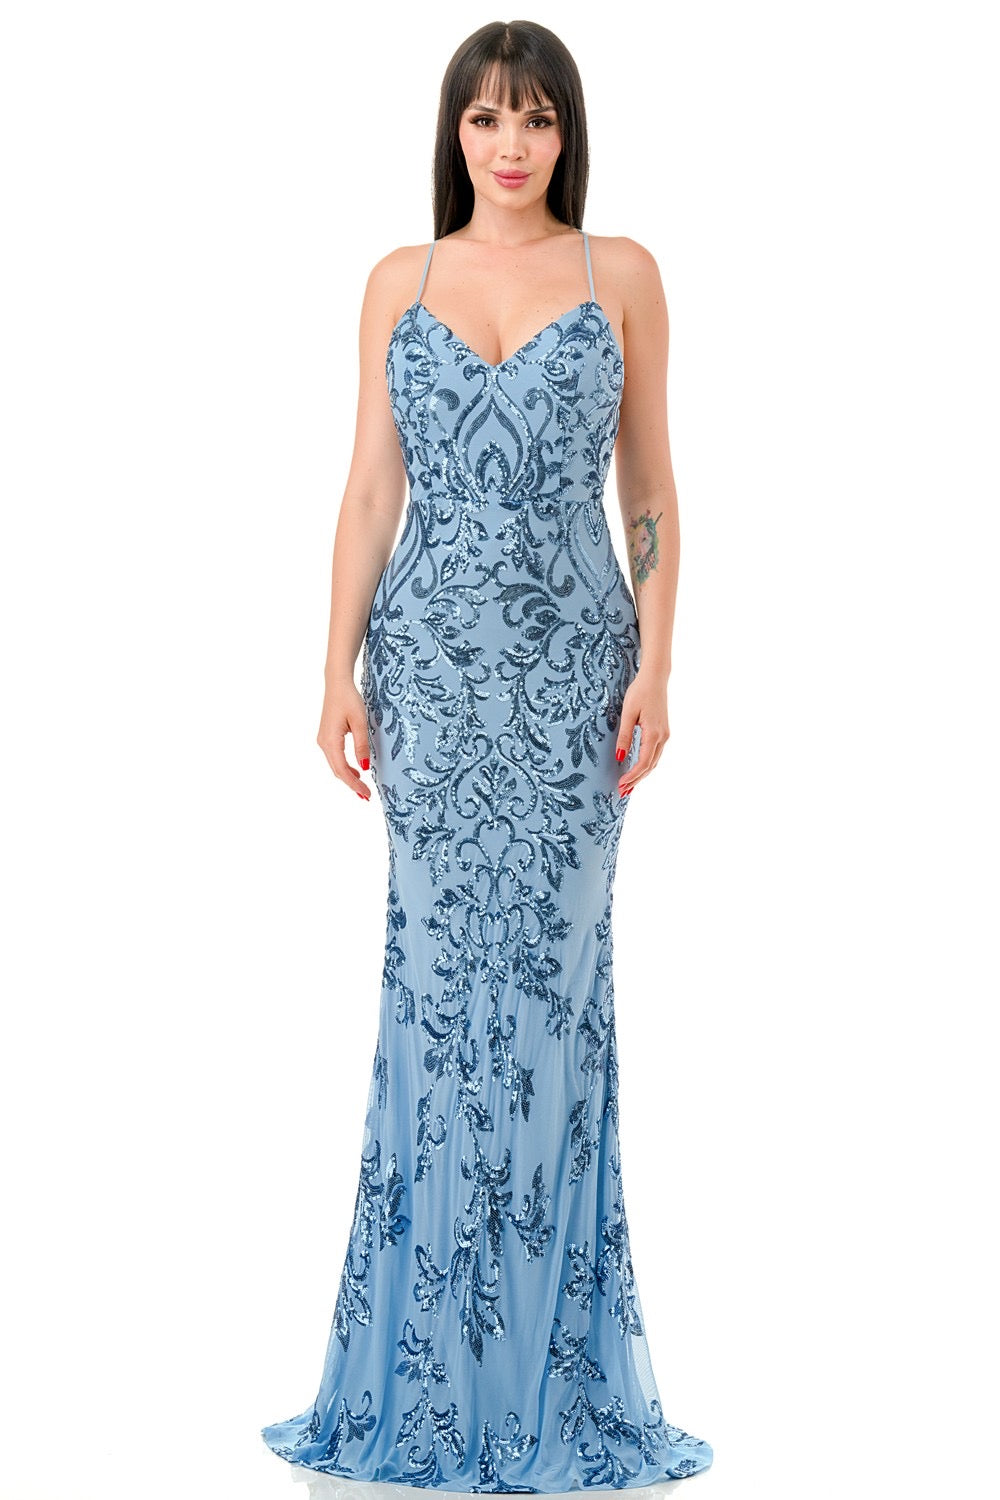 Bay Sequin Embellished Criss Cross Bodycon Blue Maxi Dress